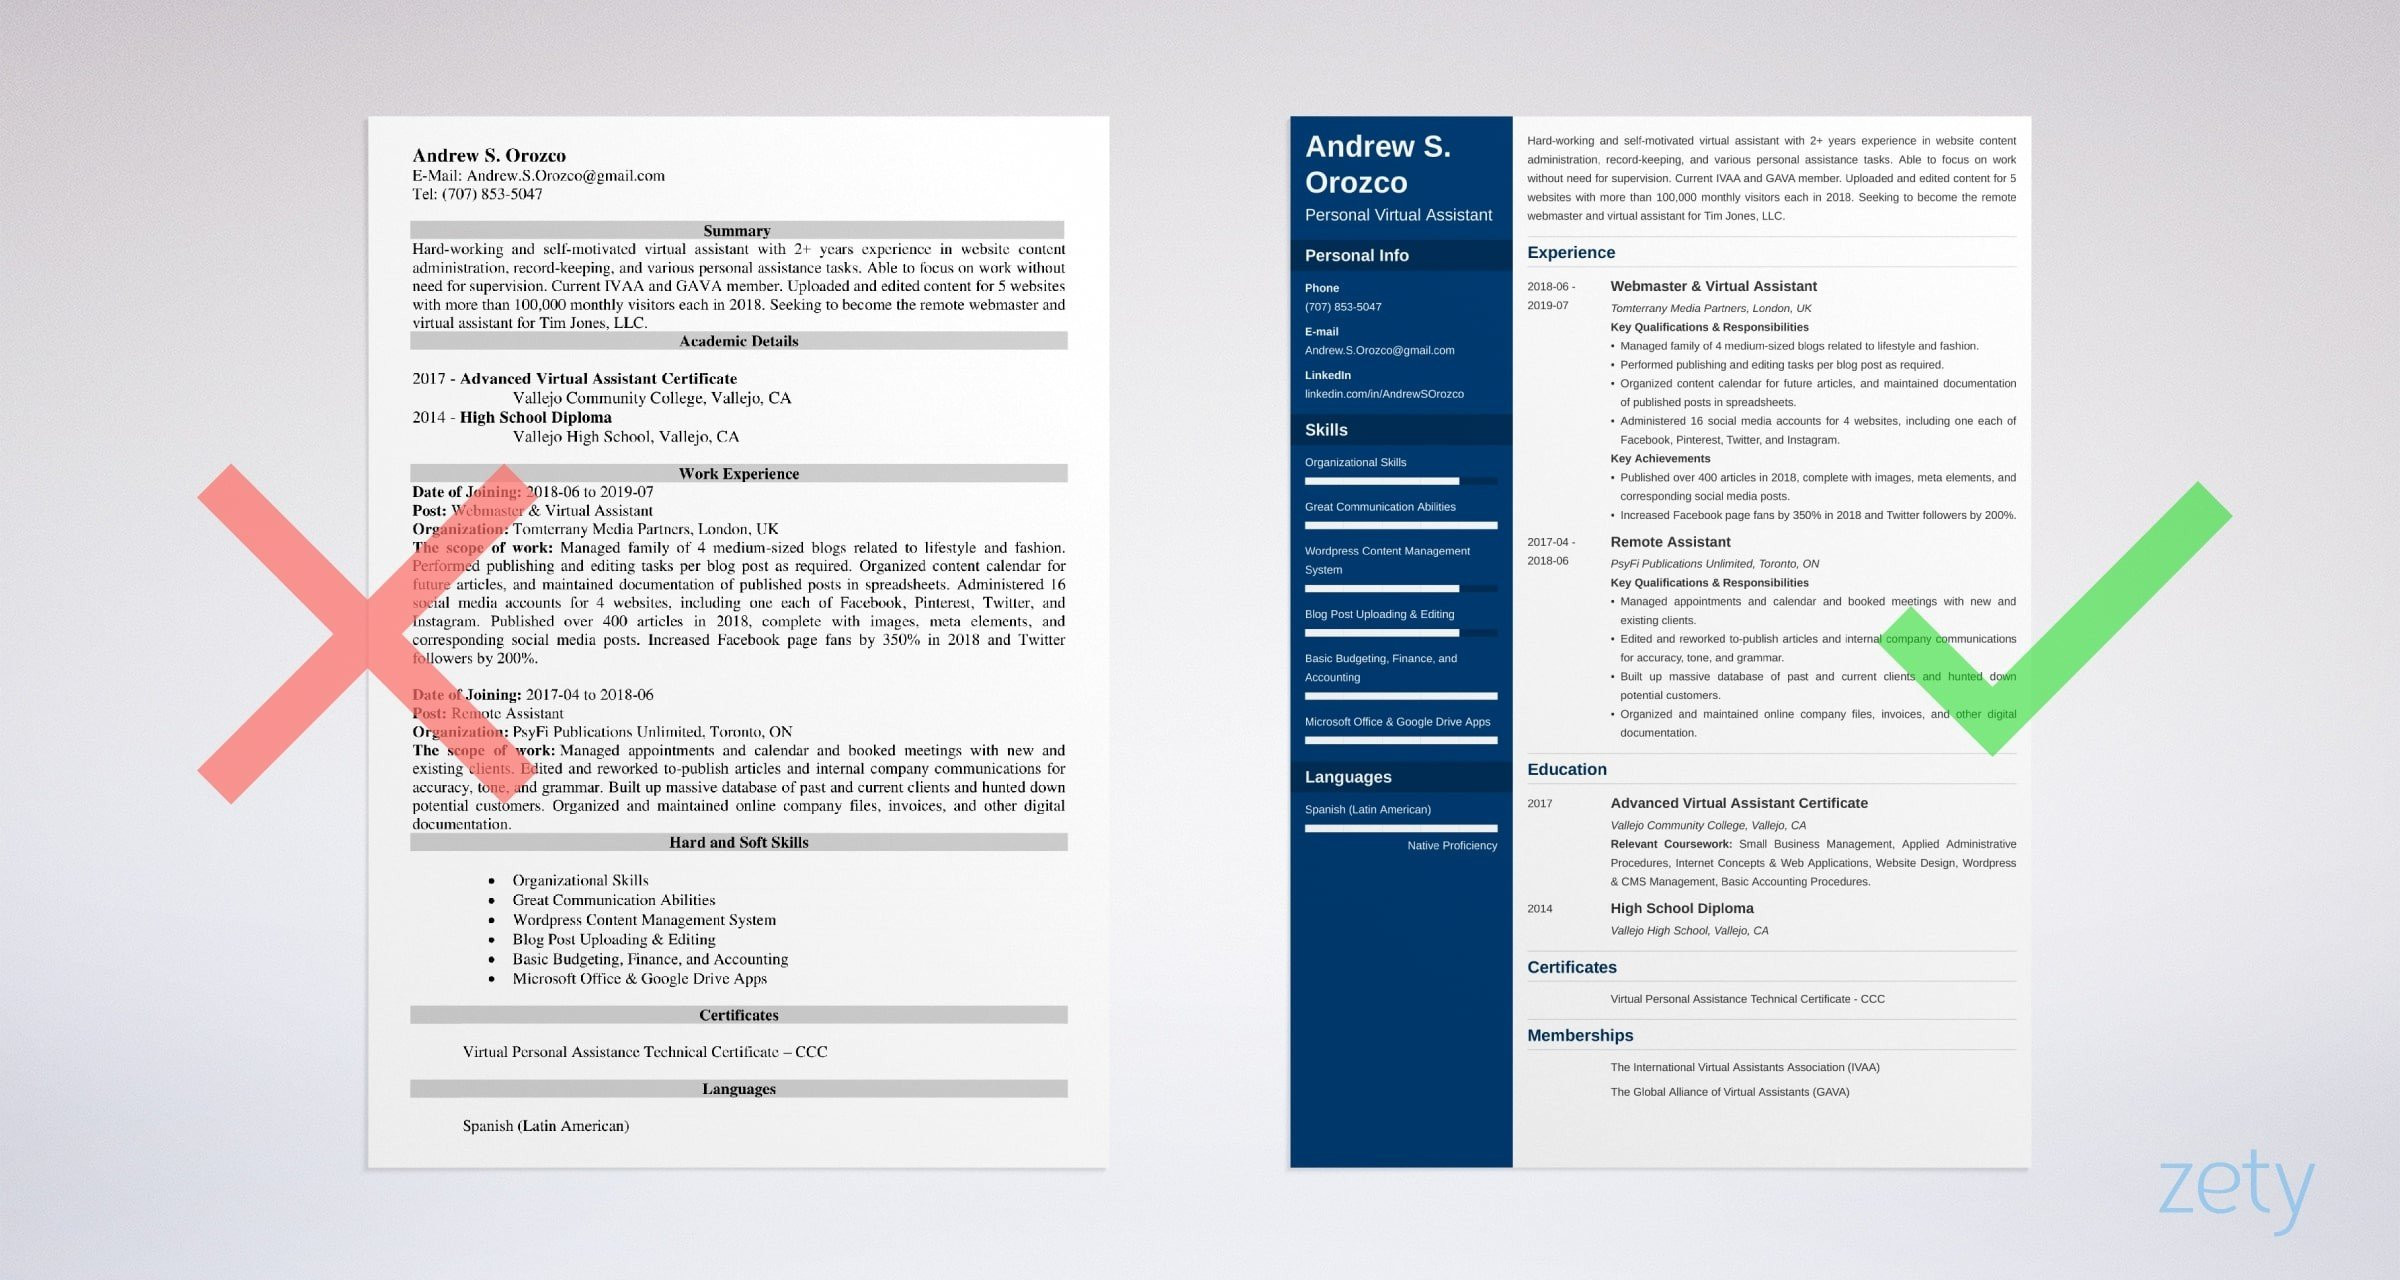 Web Designer Resume Sample and Complete Guide 20 Examples Uptowork Virtual assistant Resume Examples & Job Description